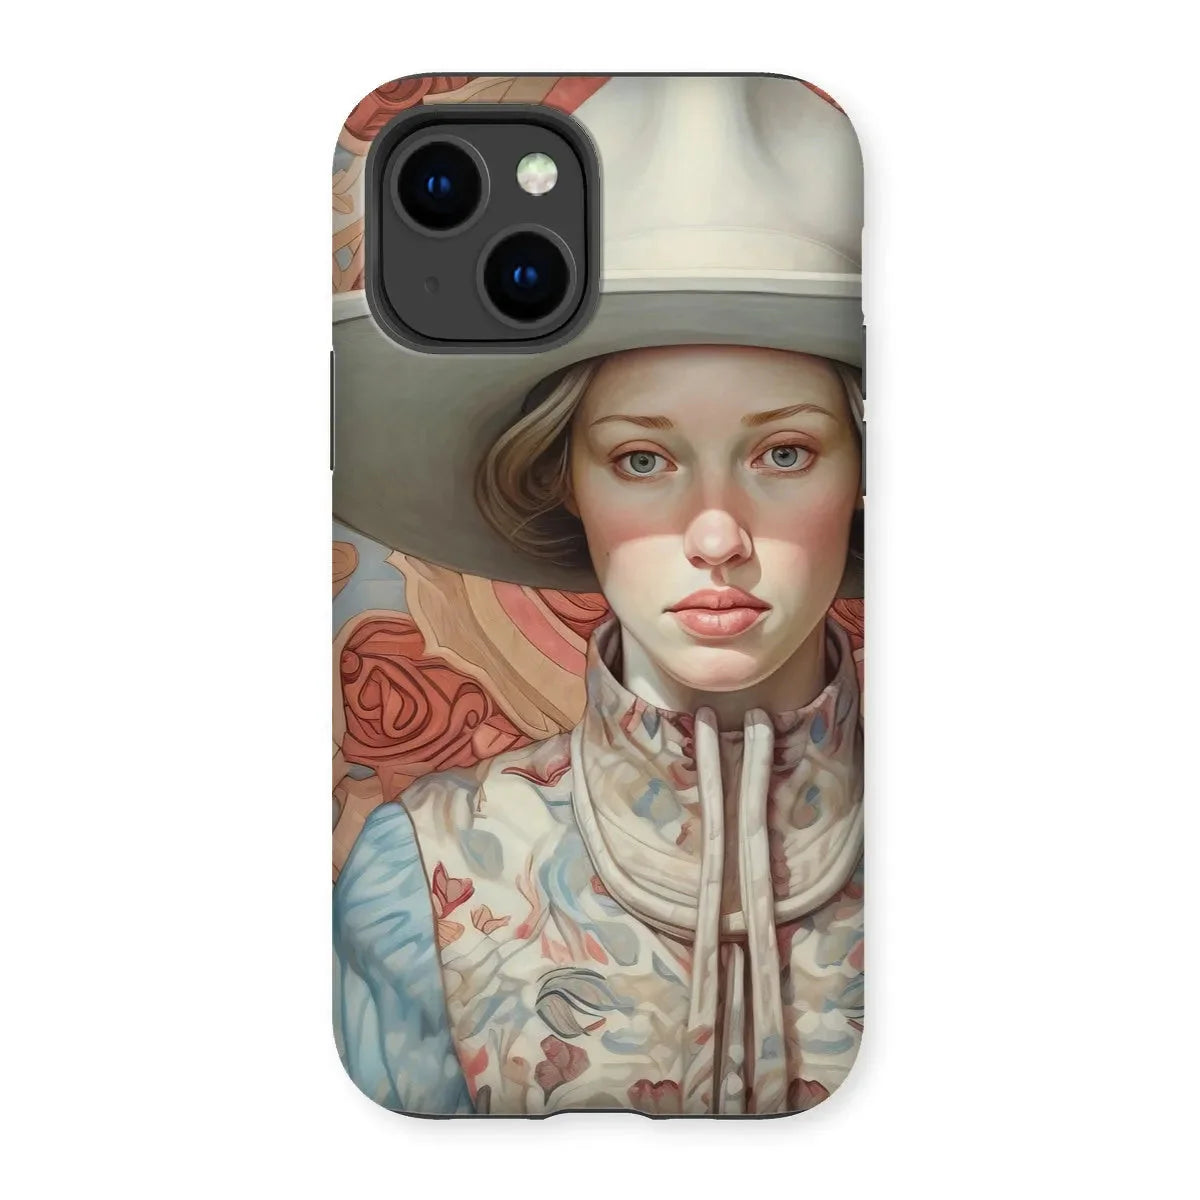 Lottie The Lesbian Cowgirl - Sapphic Art Phone Case - Iphone 14 / Matte - Mobile Phone Cases - Aesthetic Art